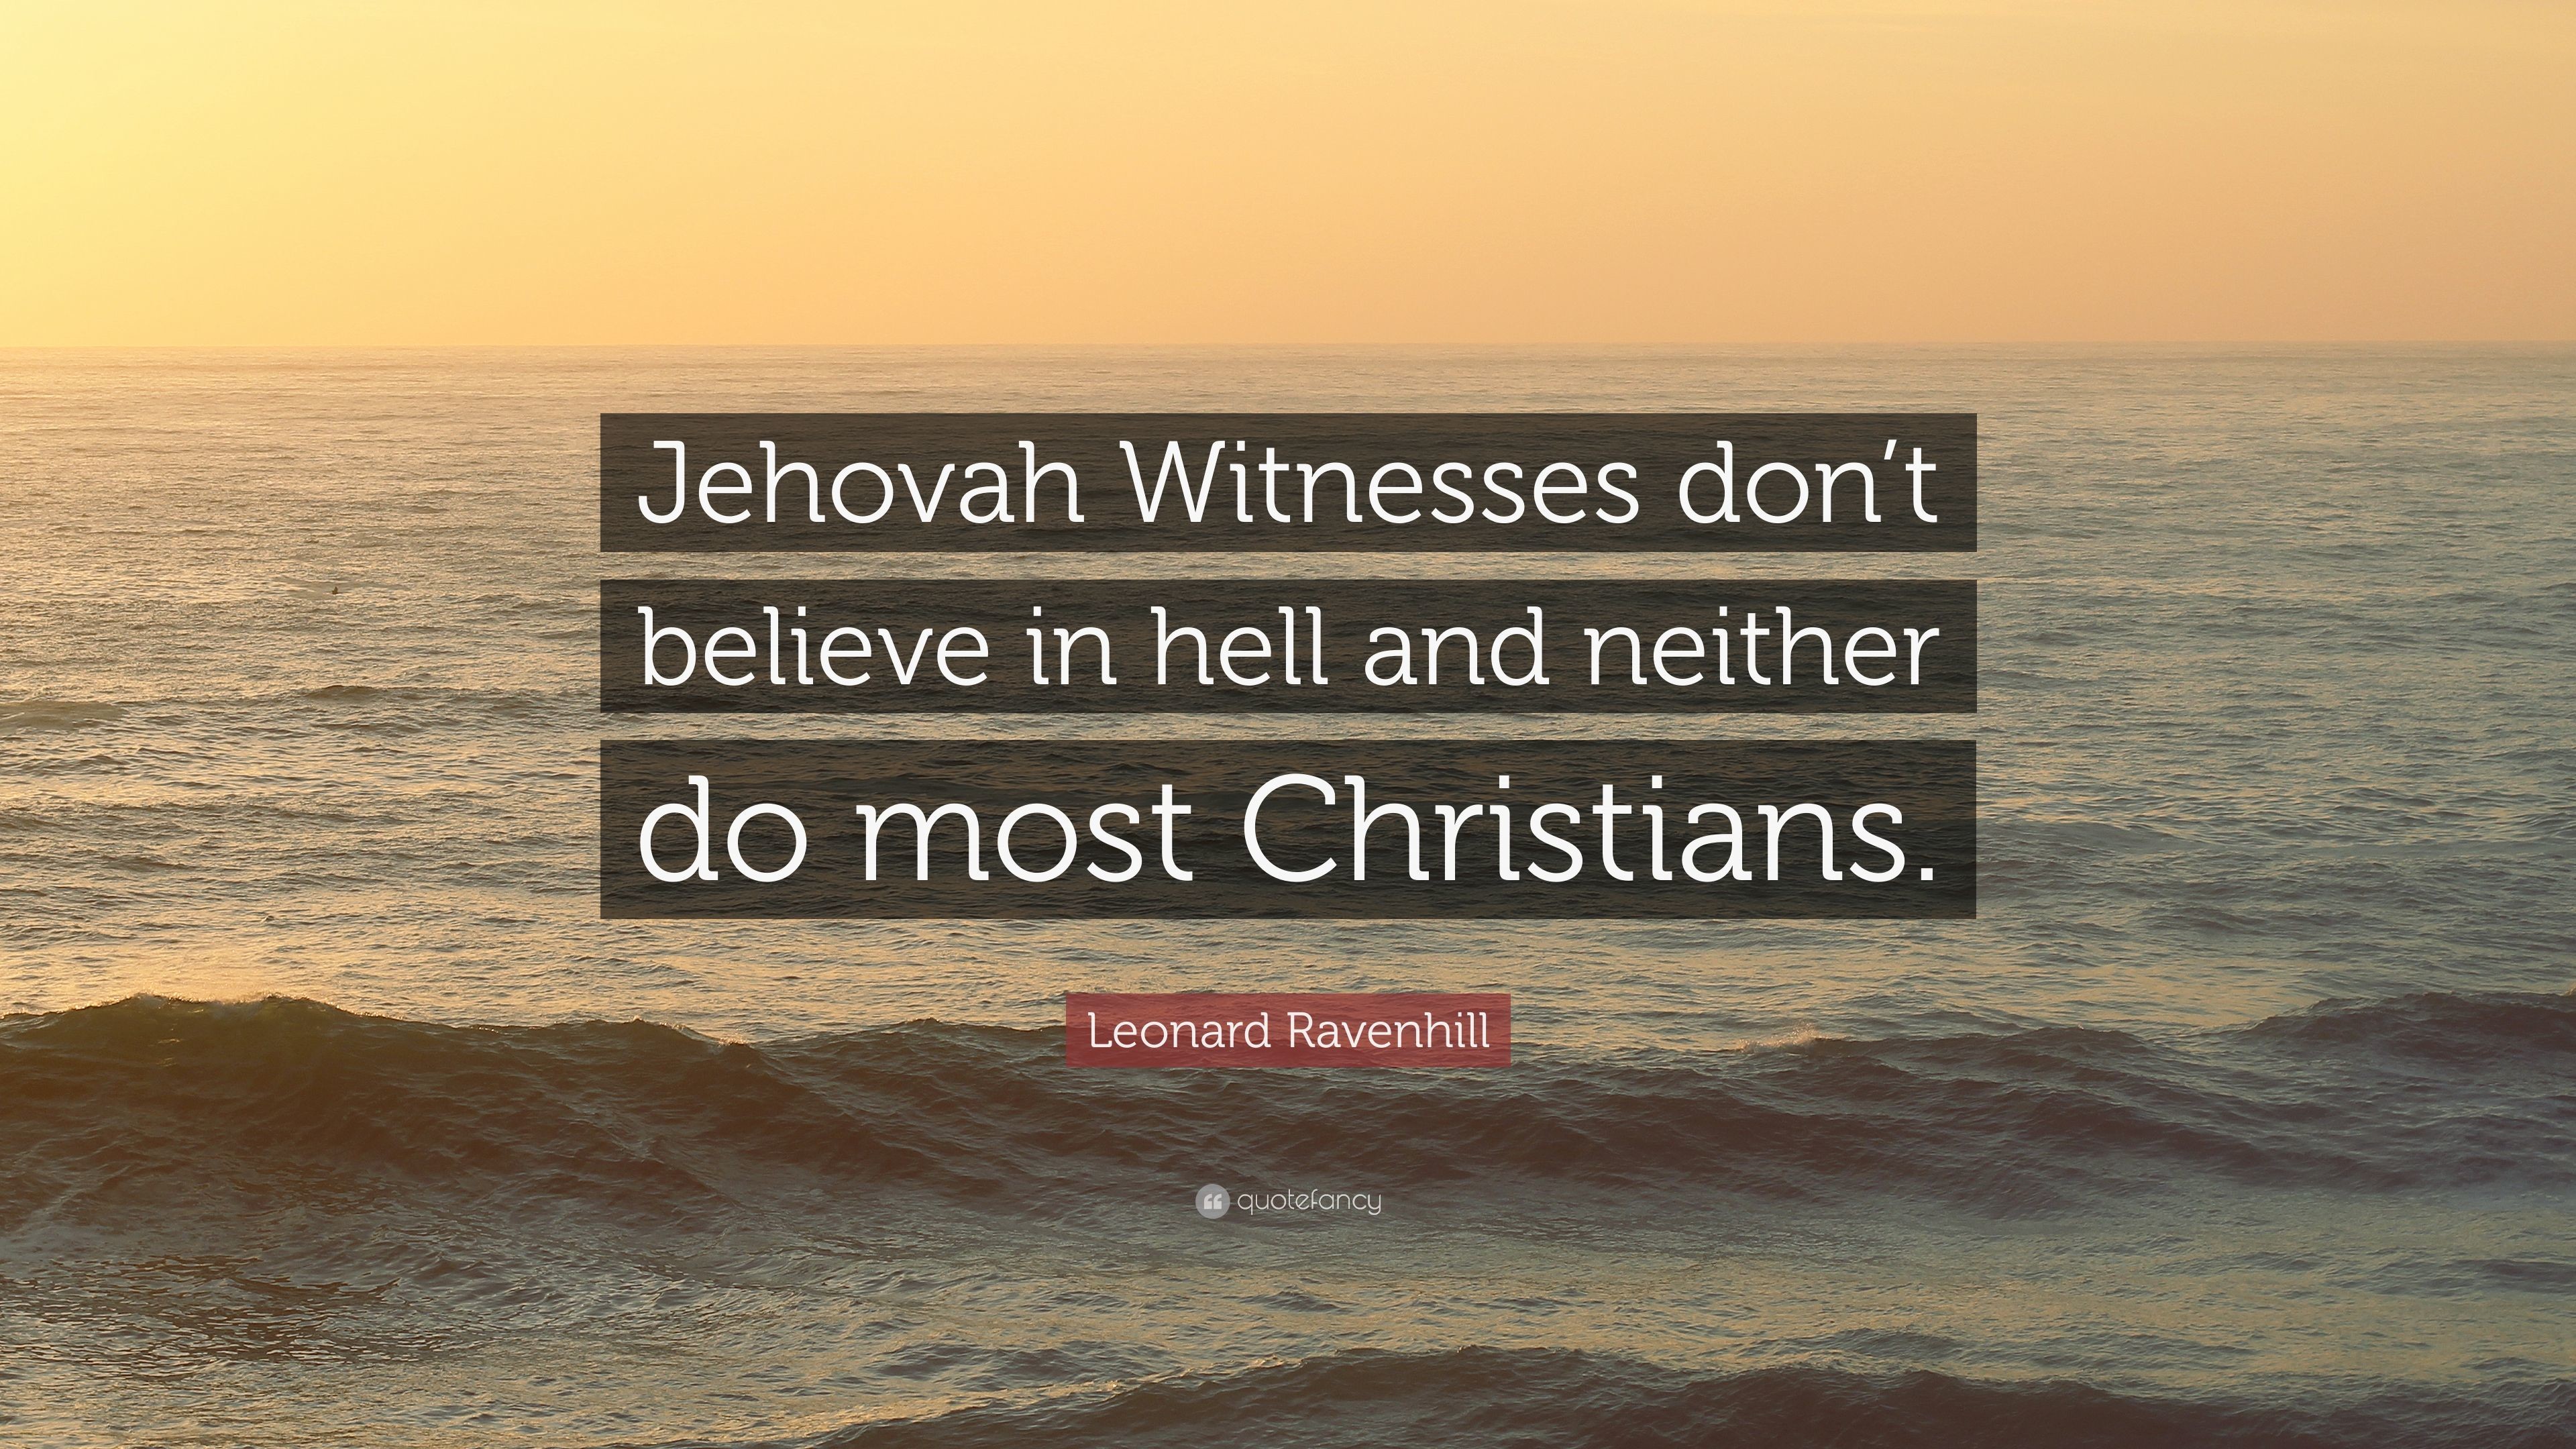 3840x2160 Leonard Ravenhill Quote: “Jehovah Witnesses don't believe in hell and  neither do